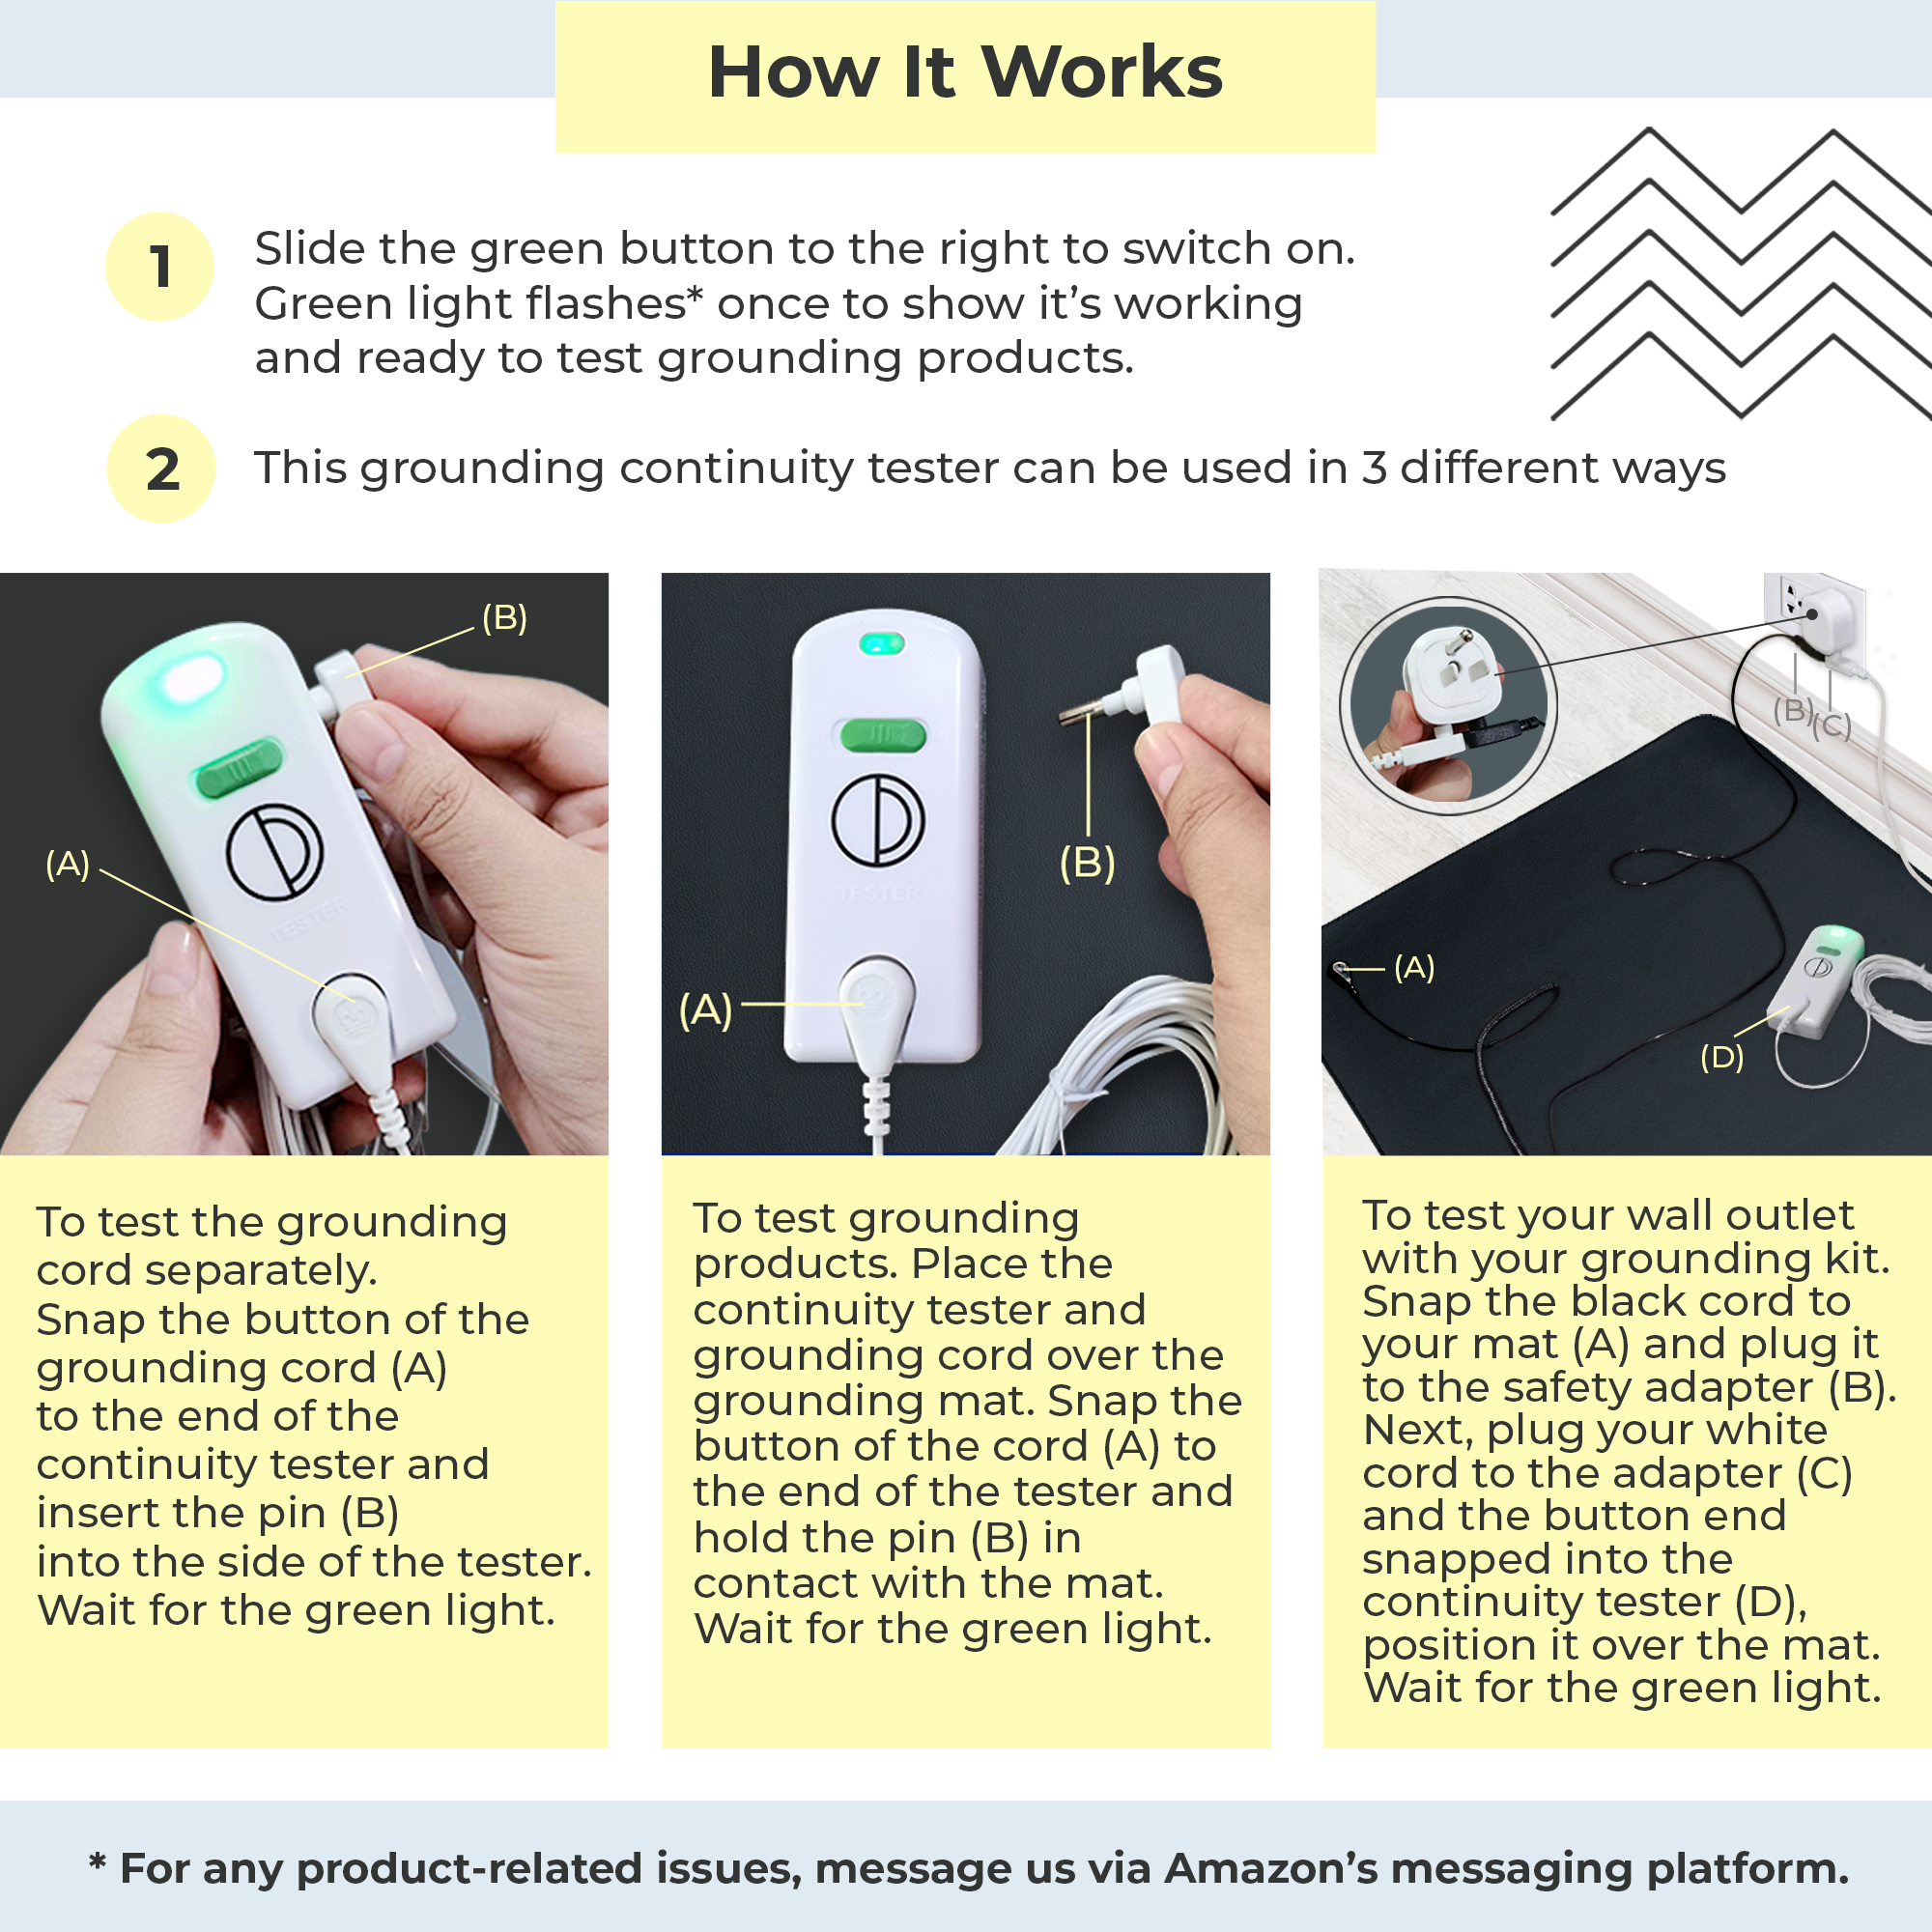 how grounding continuity tester works with your grounding cord, grounding products, grounding kit and wall outlet